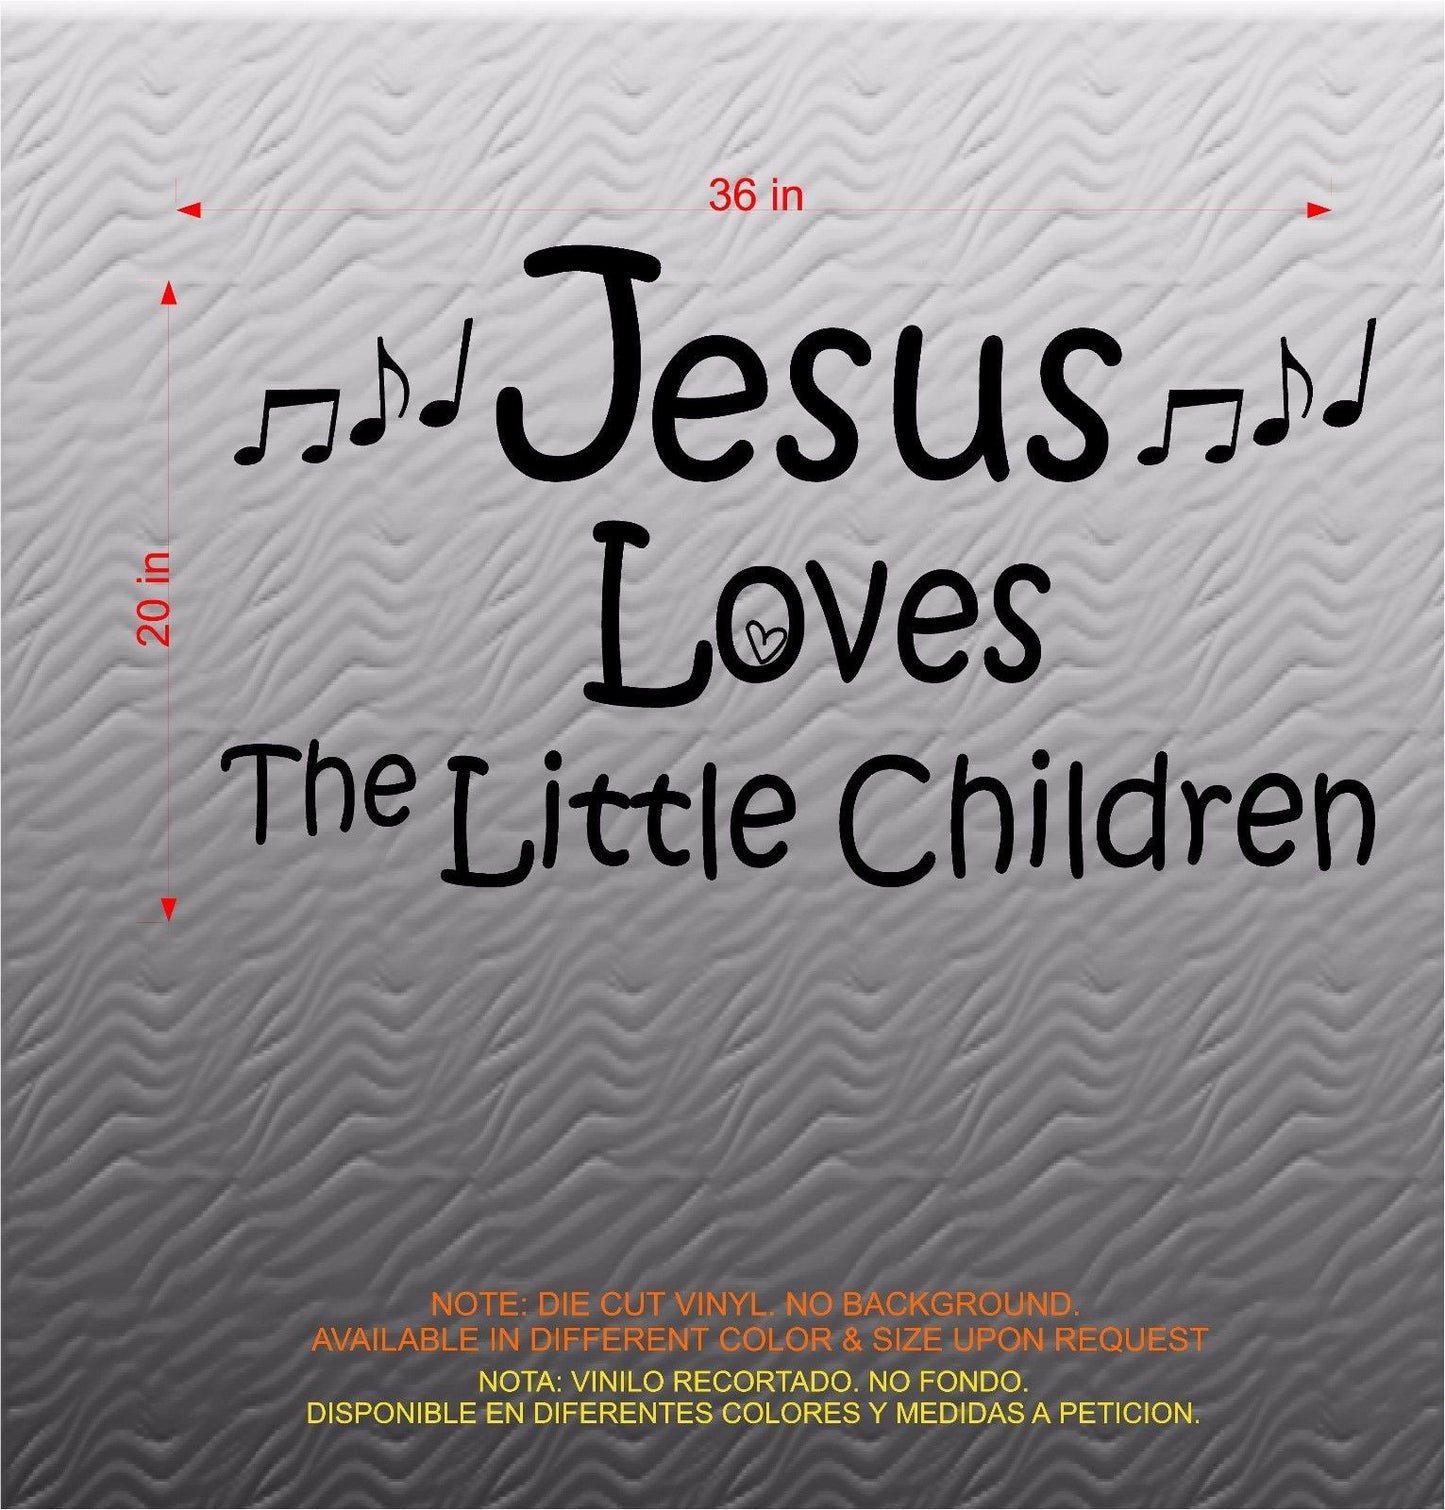 Stickers. Vinyl Wall Decal. Inspiration. Jesus Loves The Little Children.  Music Notes.